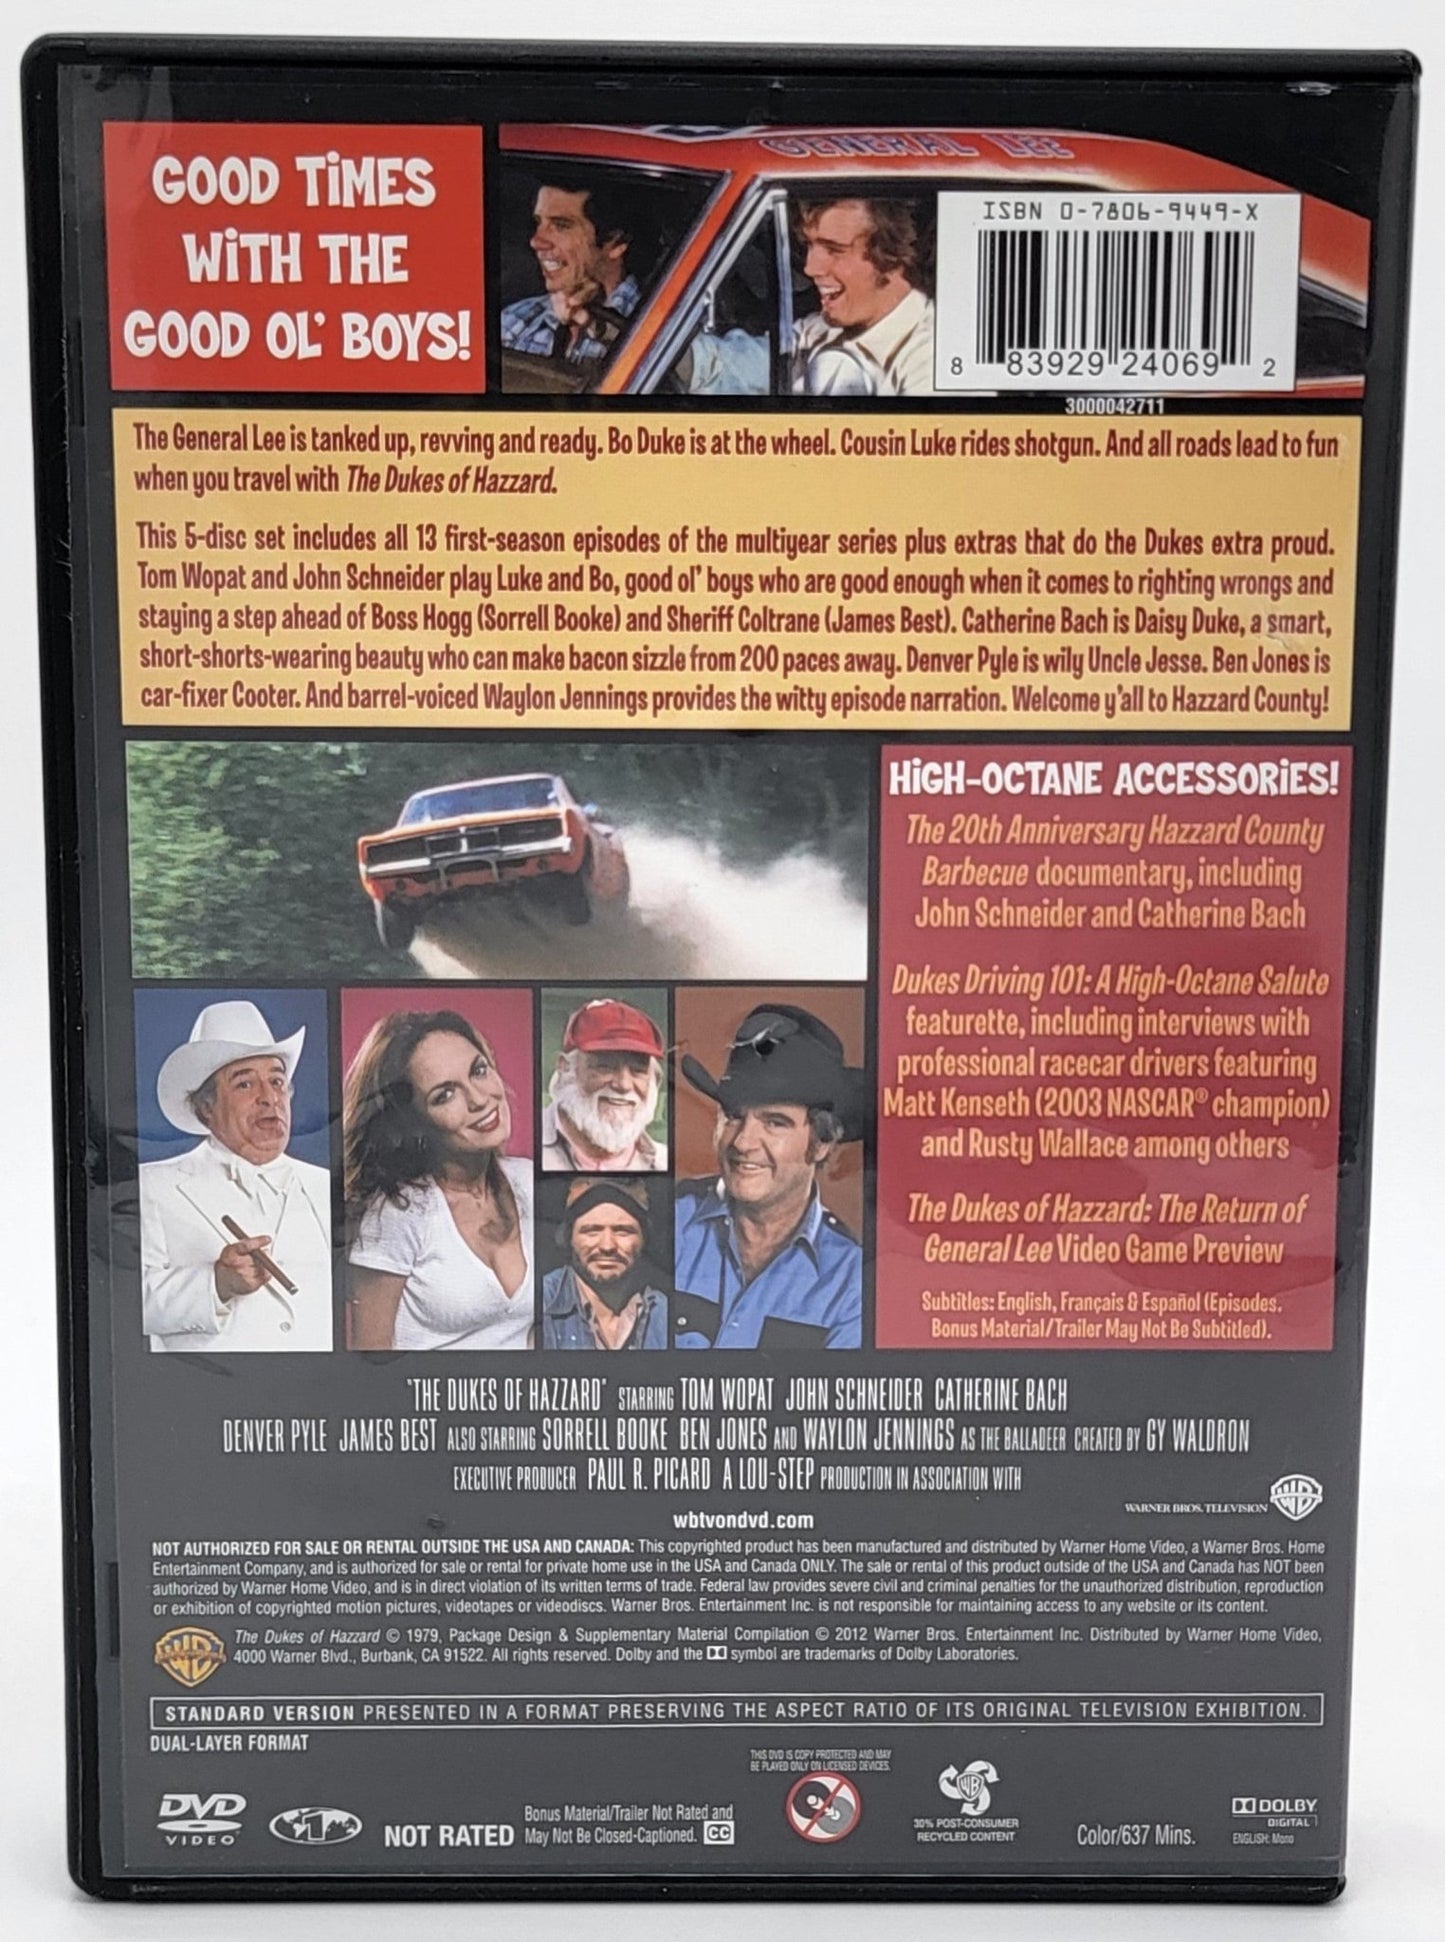 Warner Brothers - The Dukes of Hazzard | DVD Box Set | Complete First Season - 5 Disk Set - DVD - Steady Bunny Shop